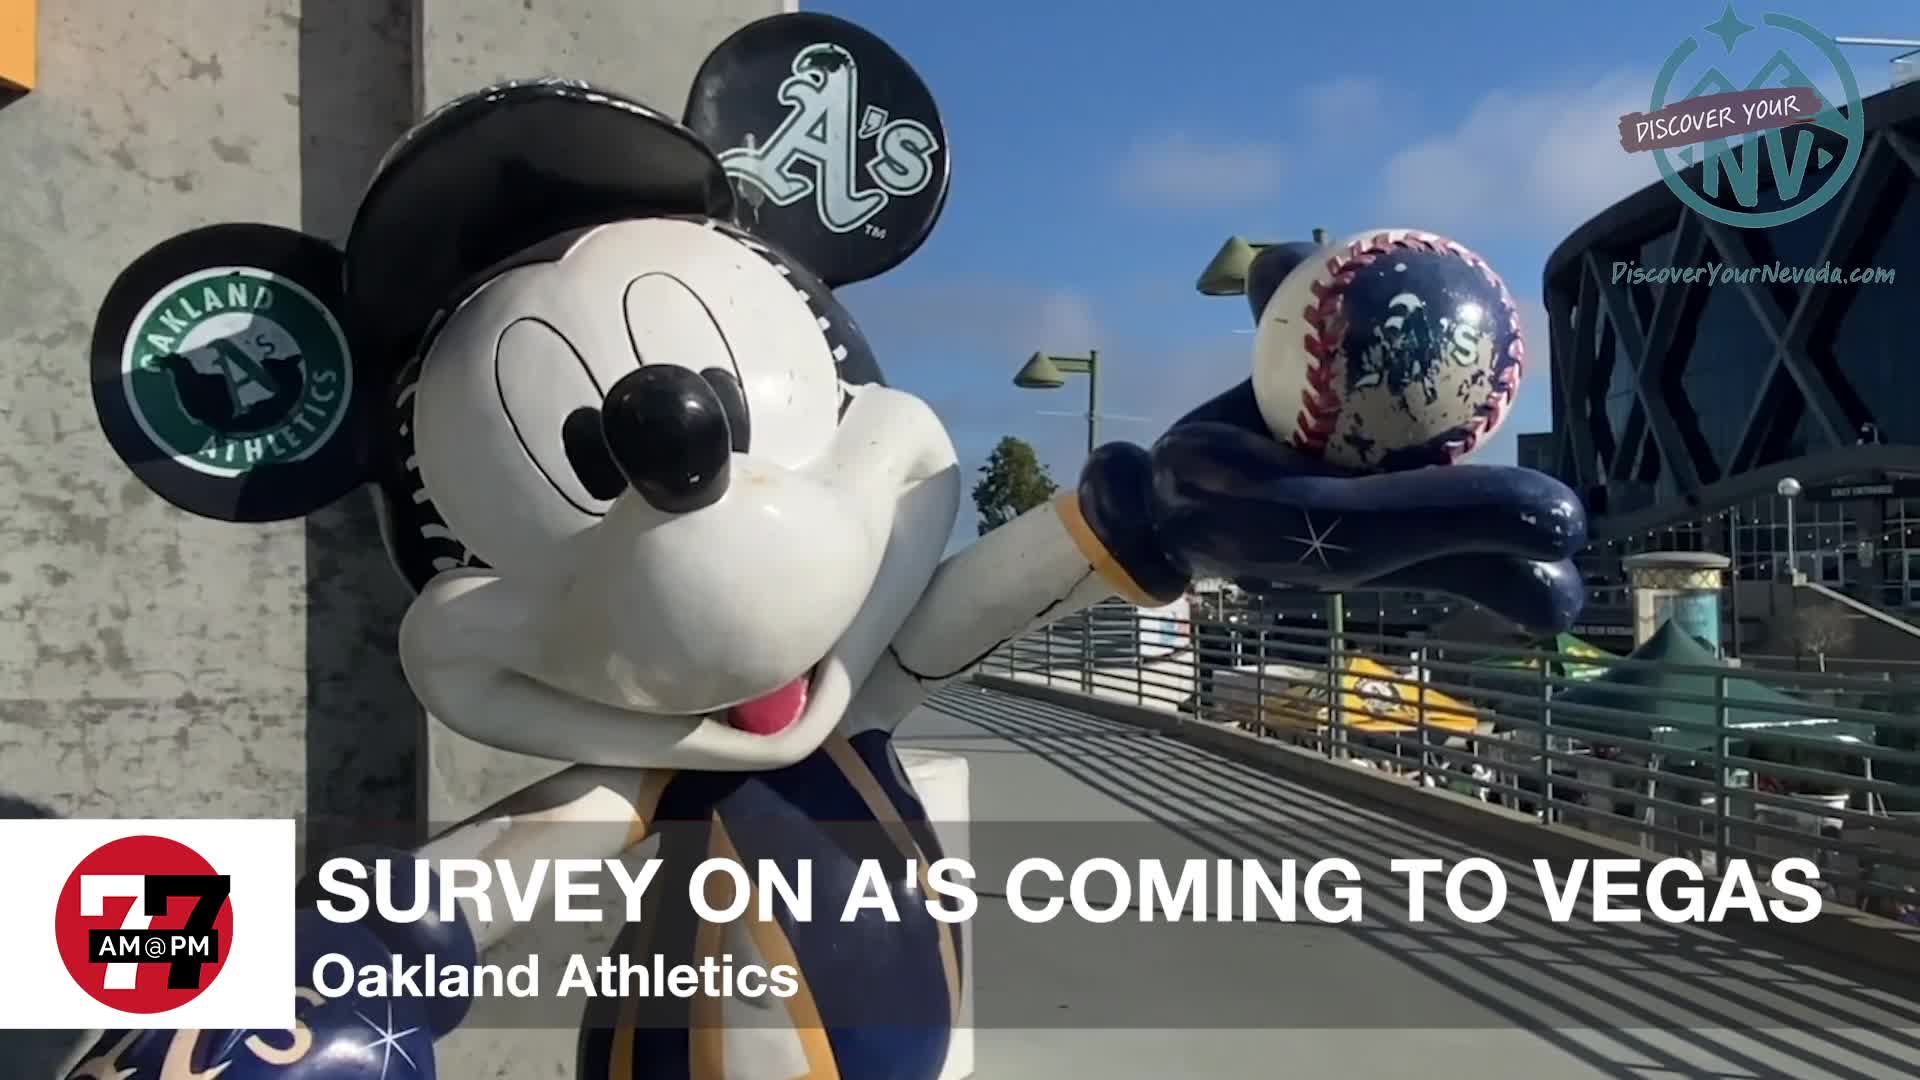 7@7PM Survey On A’s Coming To Vegas